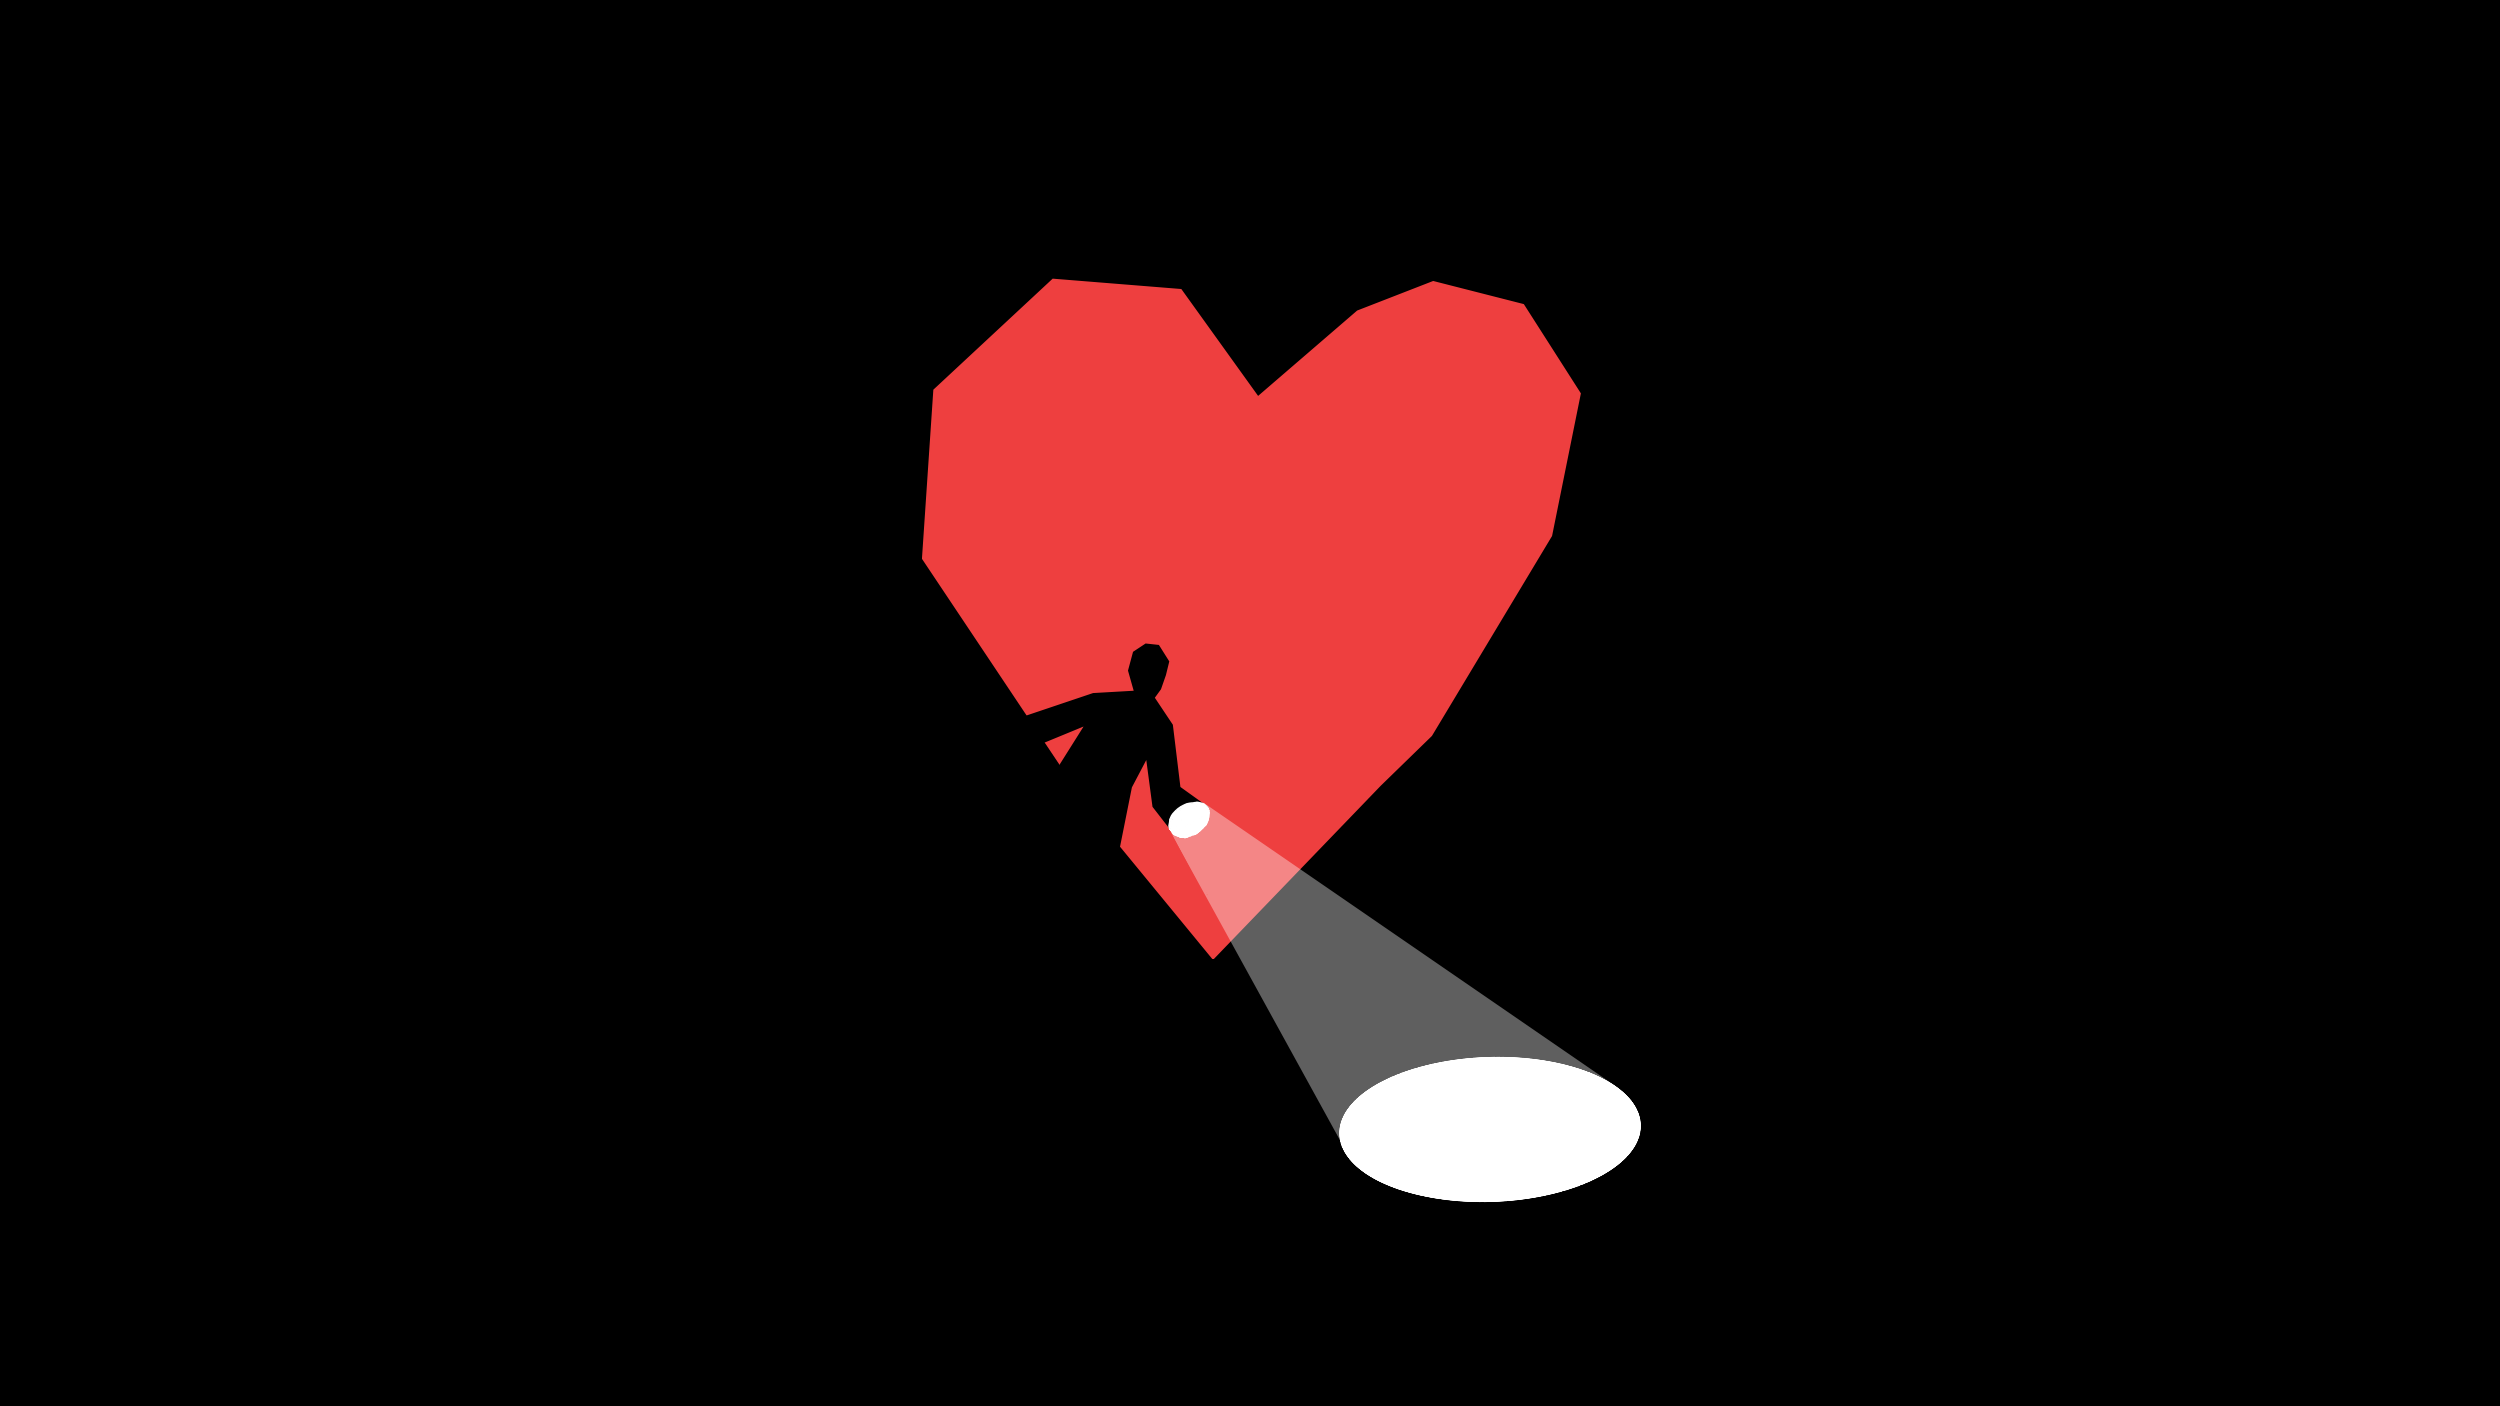 An illustration of a heart and someone searching with a flashlight